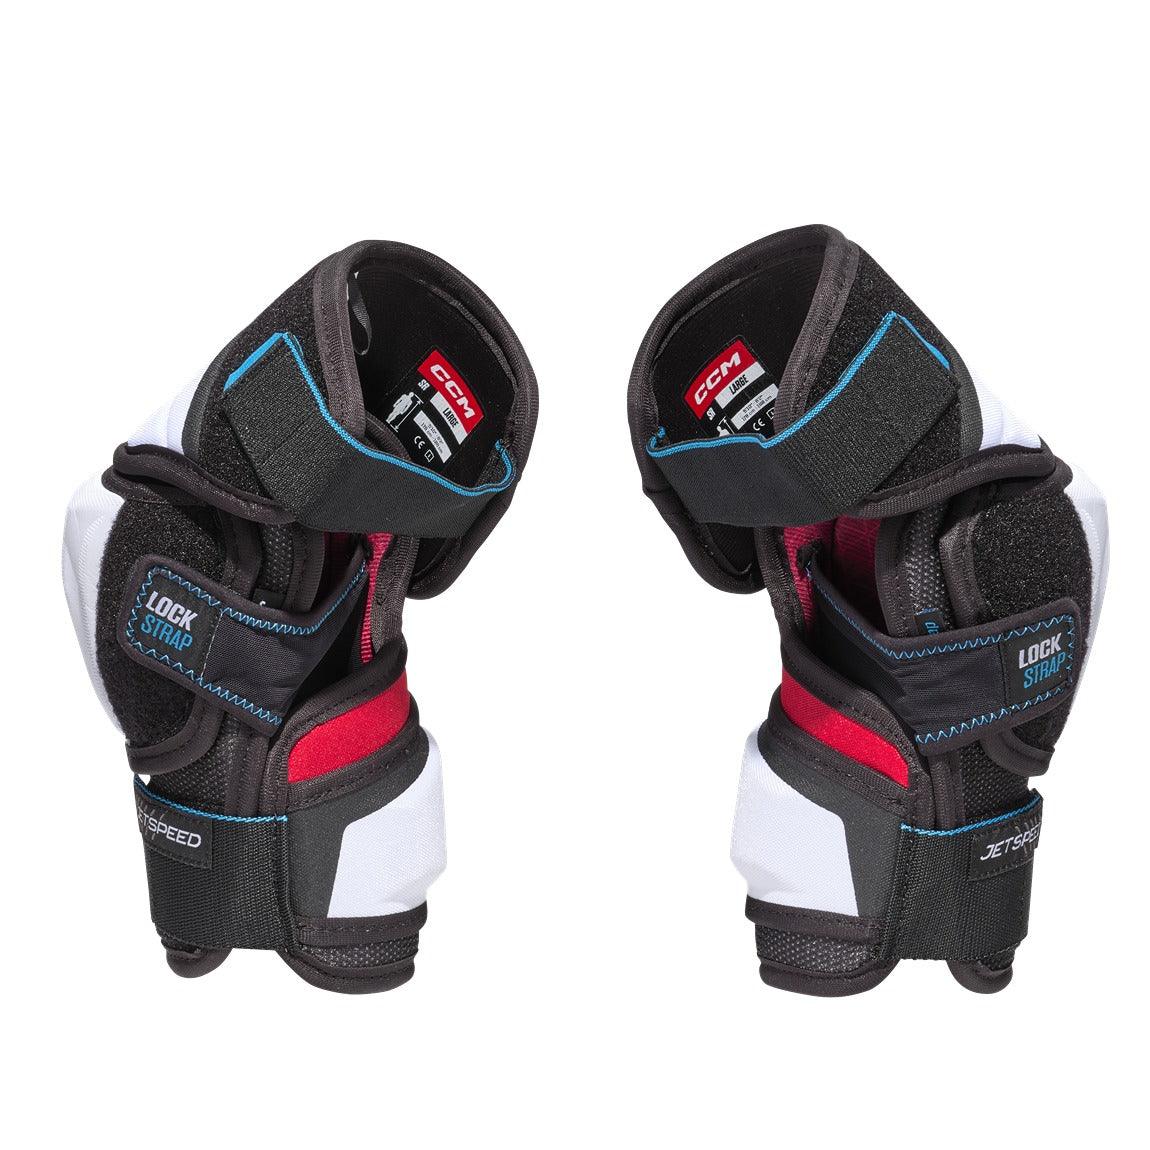 Jetspeed FT680 Elbow Pads - Junior - Sports Excellence